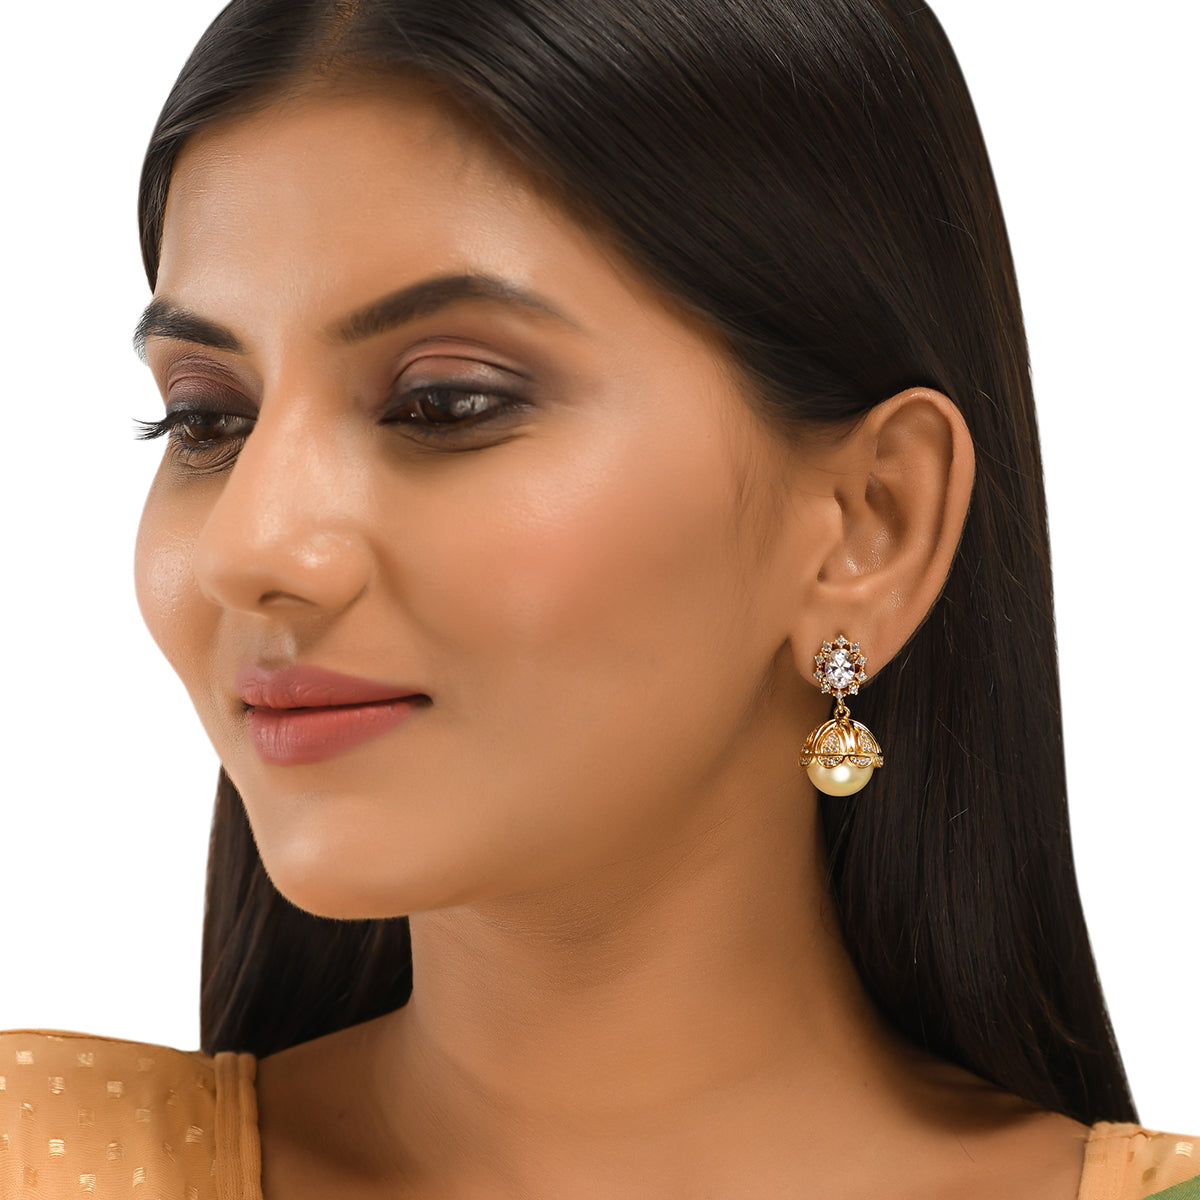 Women's Cz Traditional Gold Plated White Jhumka Earrings - Voylla